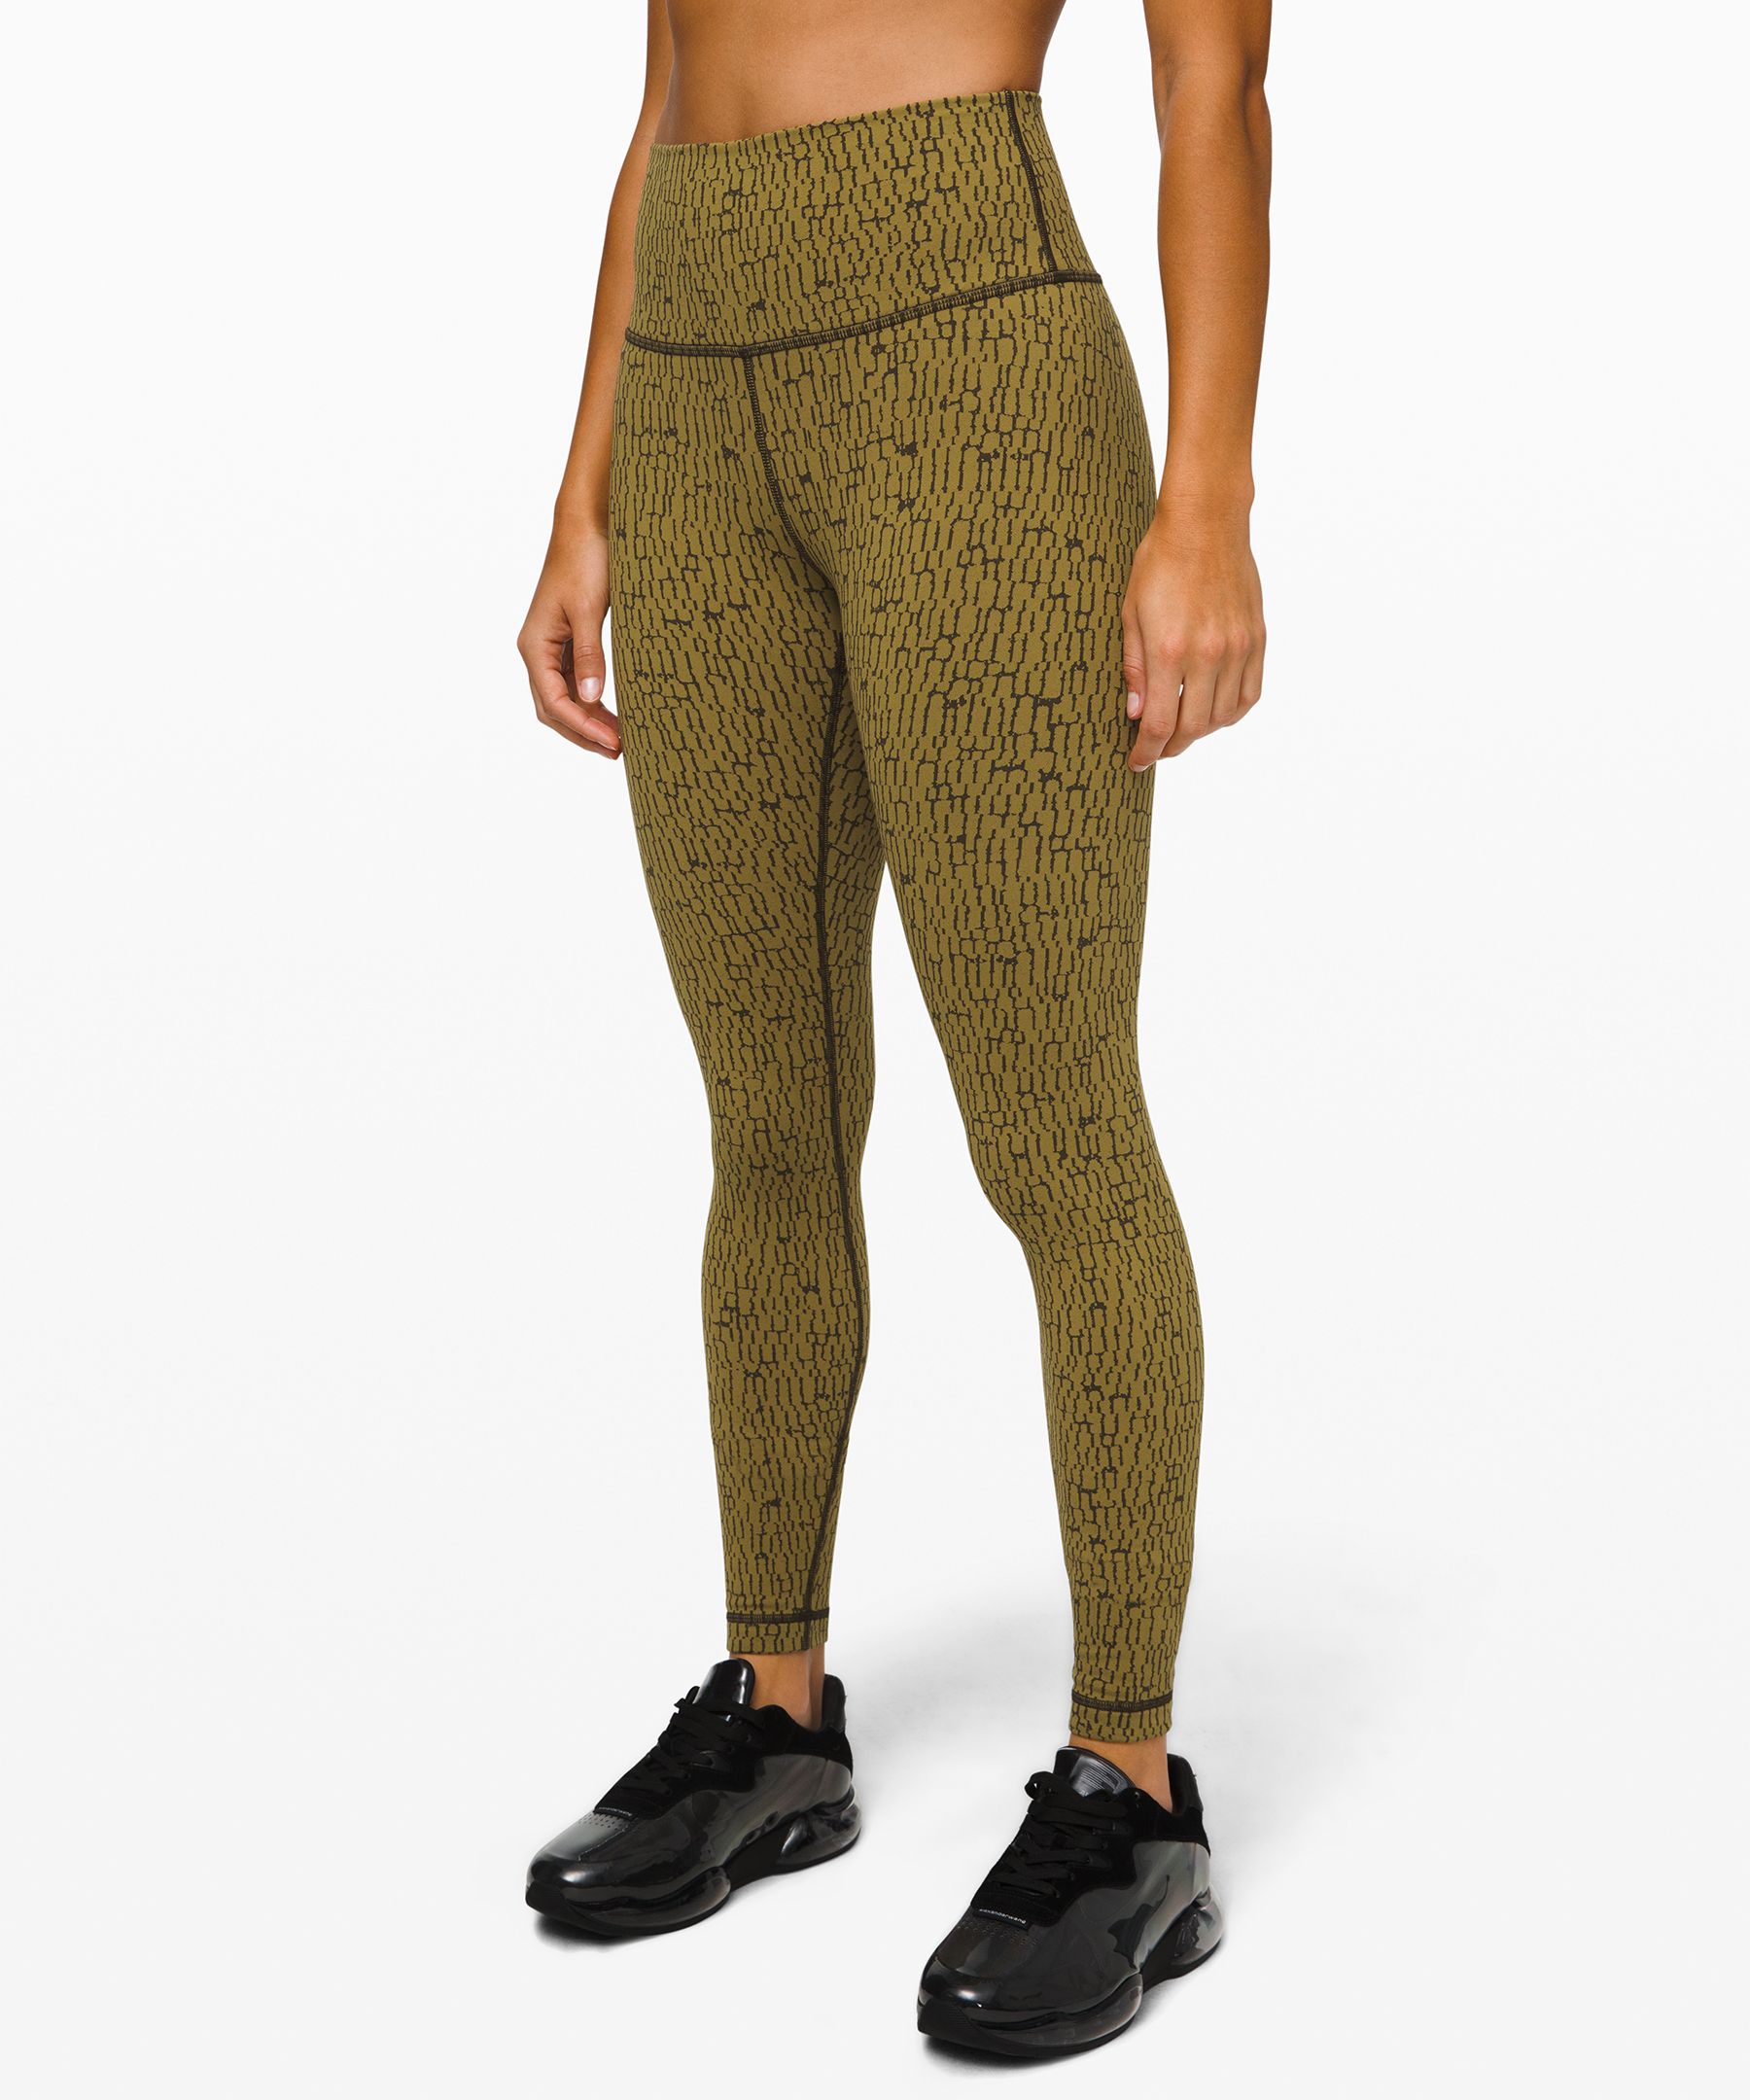 Lululemon Wunder Under High-rise Tight 28" In Stacked Jacquard Mossy Dark Olive